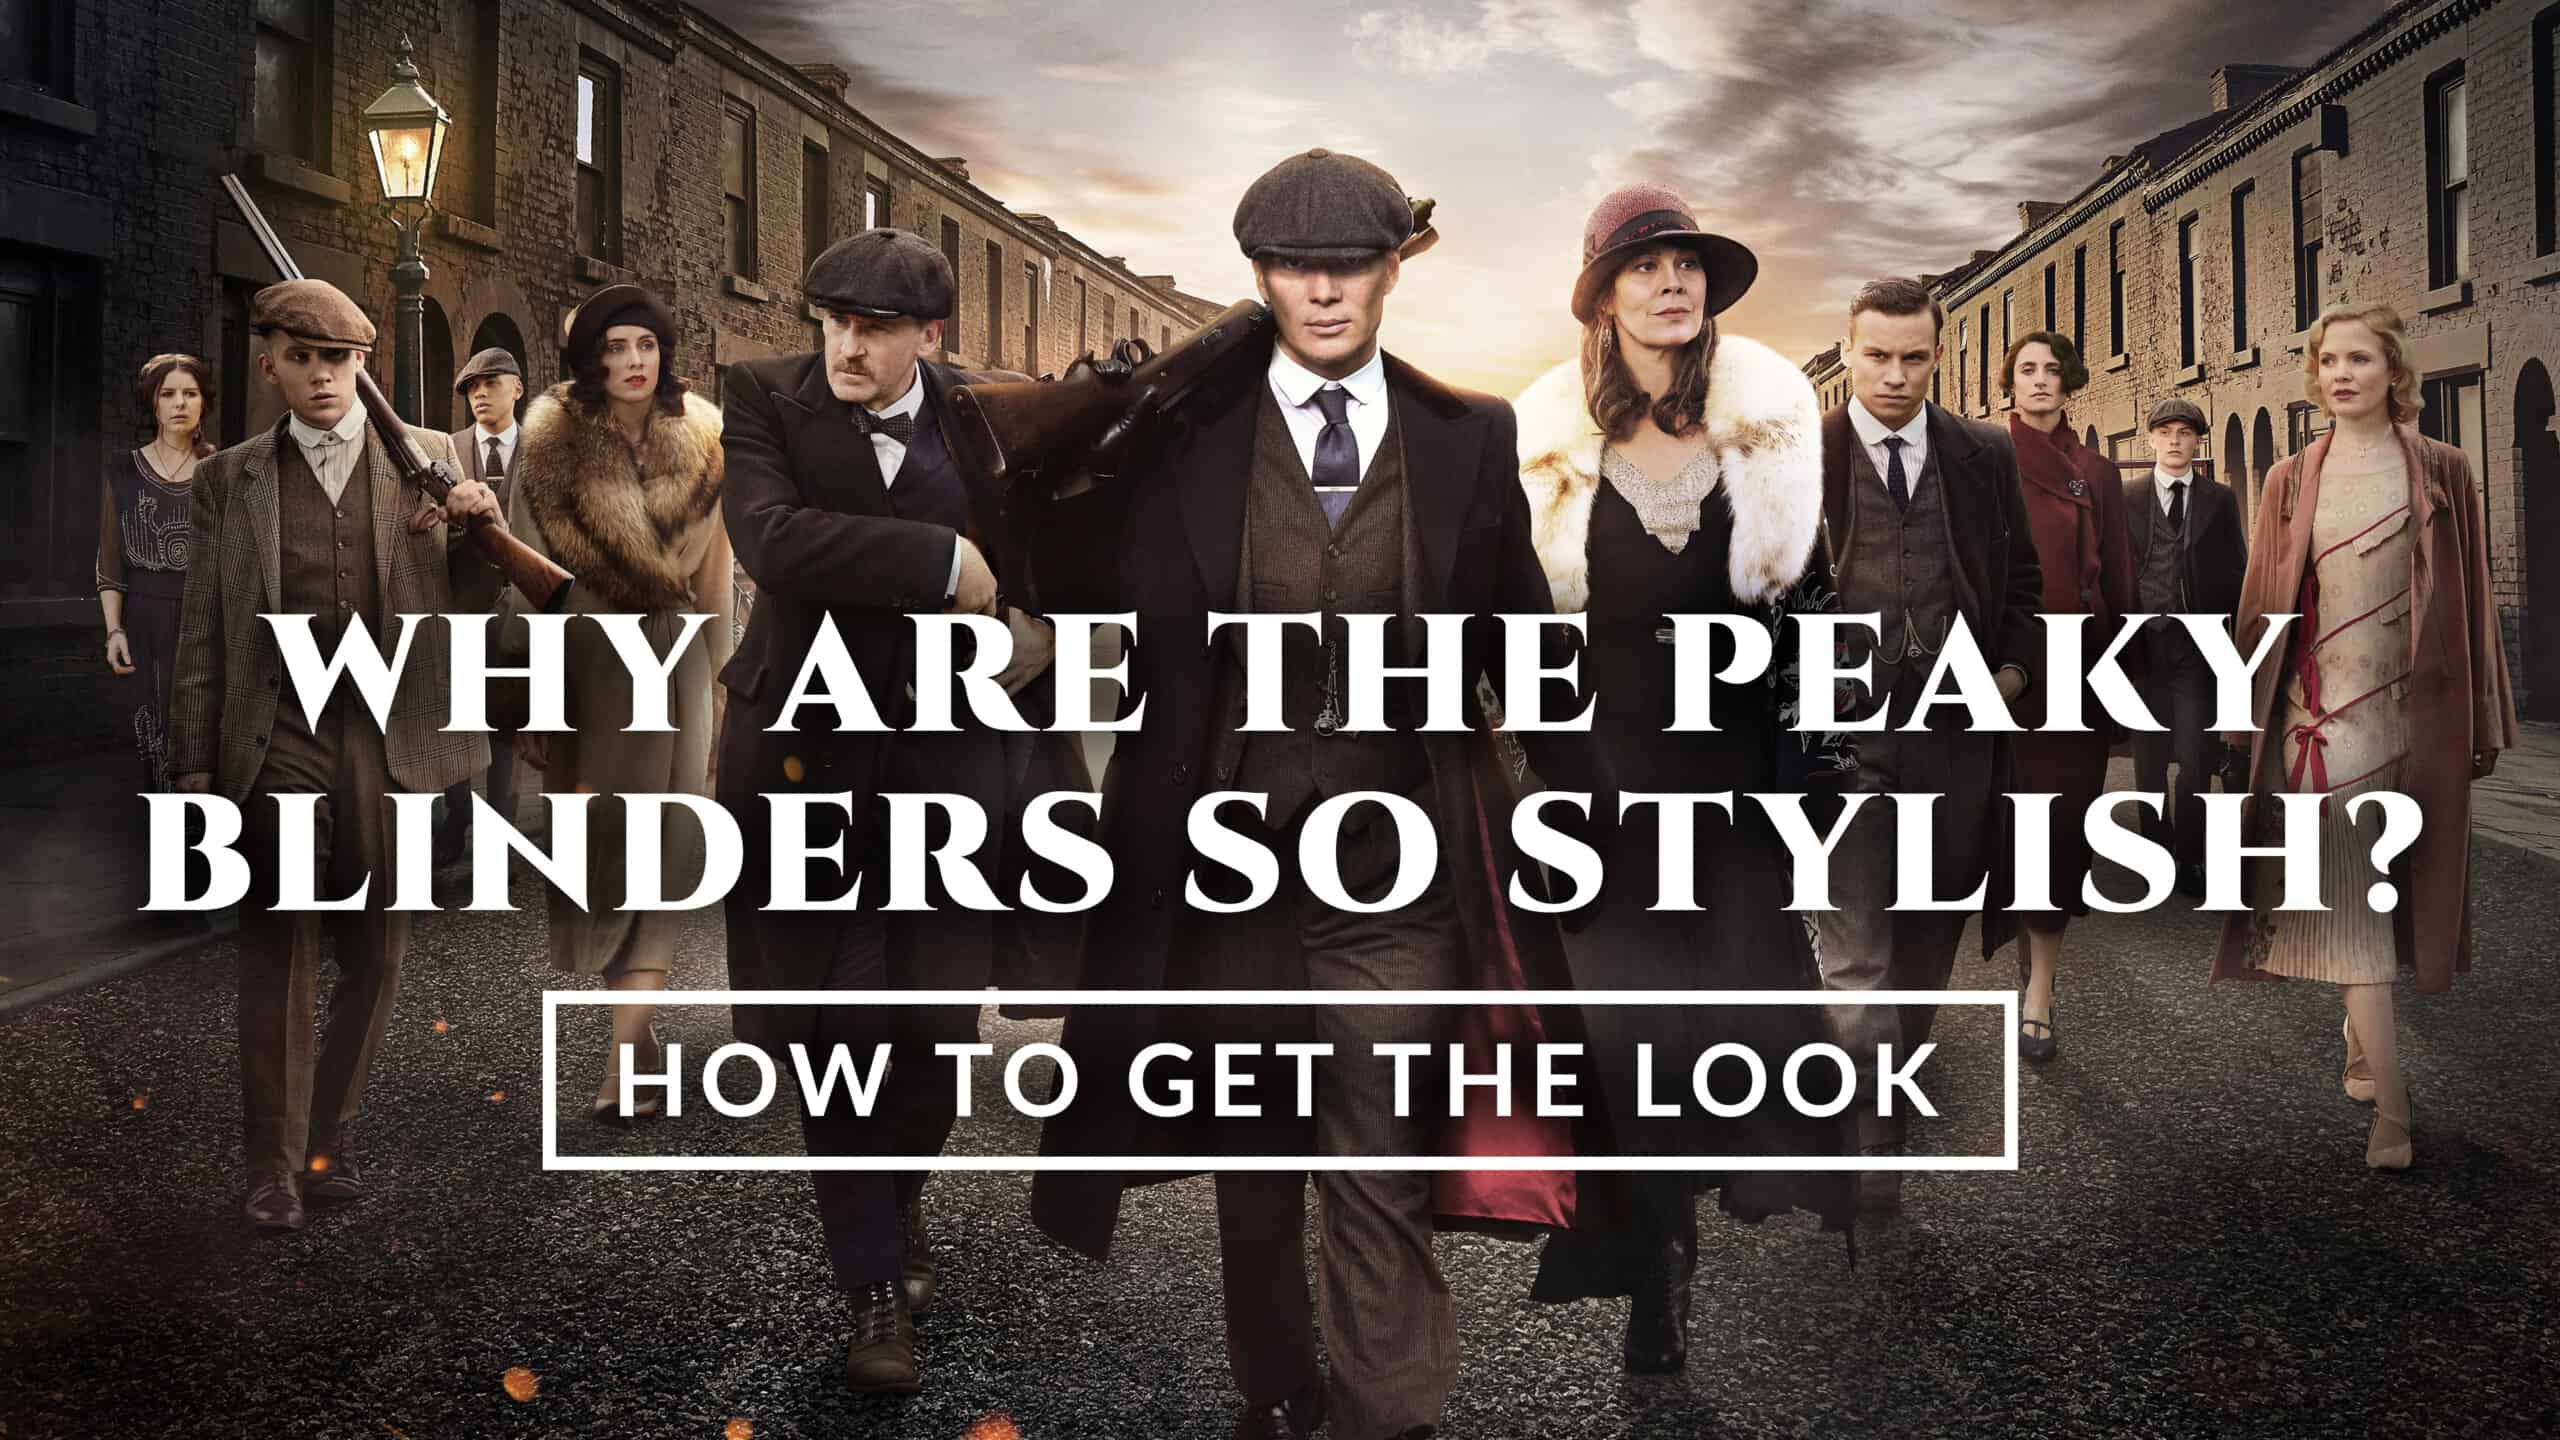 Men's Peaky Blinders Cillian Murphy Outfits Costume Thomas Shelby